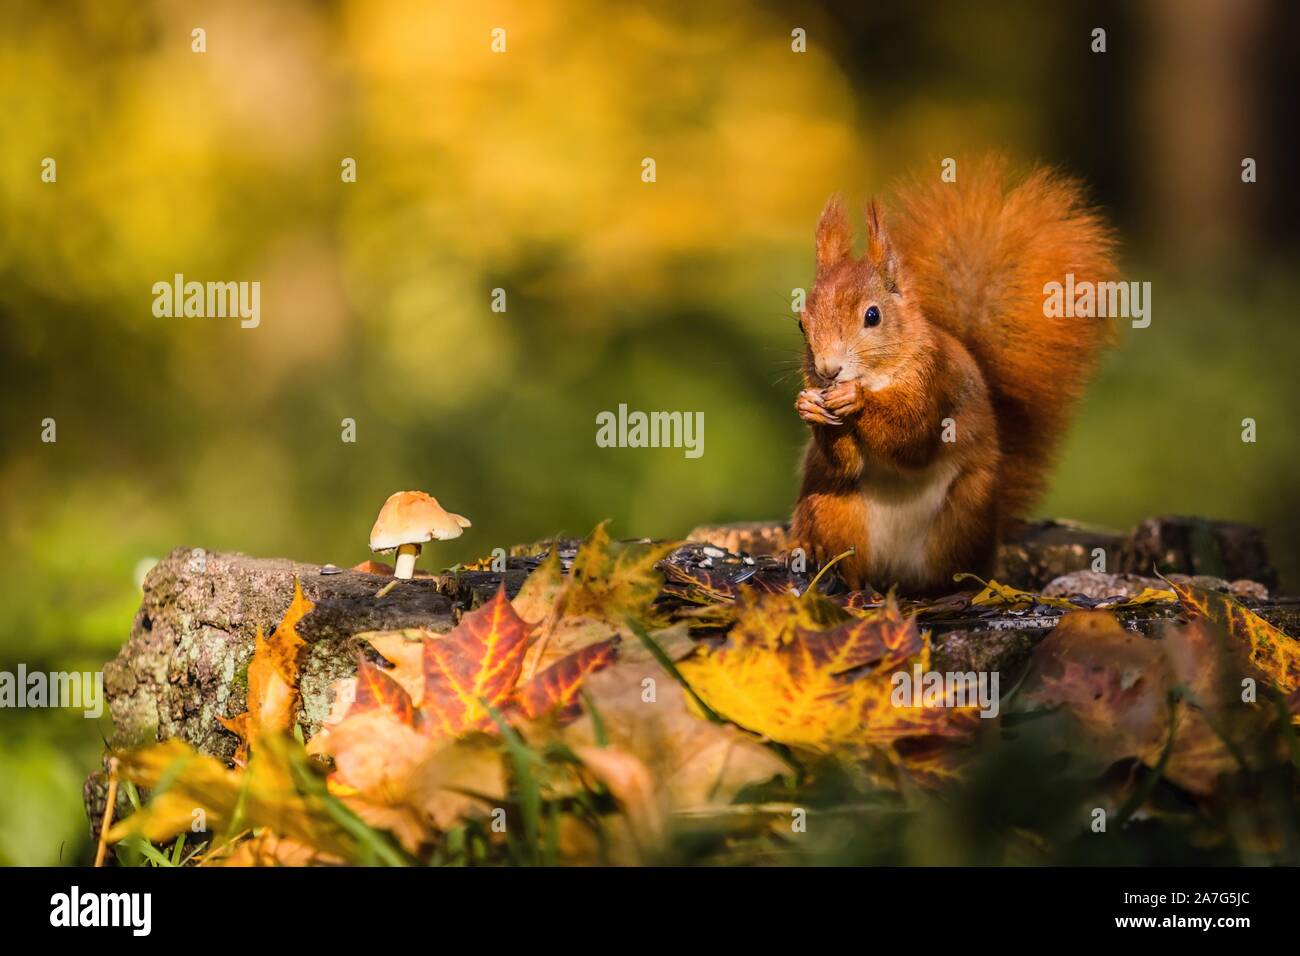 Cute red Eurasian squirrel with fluffy tail sitting on a tree stump covered with colorful leaves and a mushroom feeding on seeds. Sunny autumn day. Stock Photo